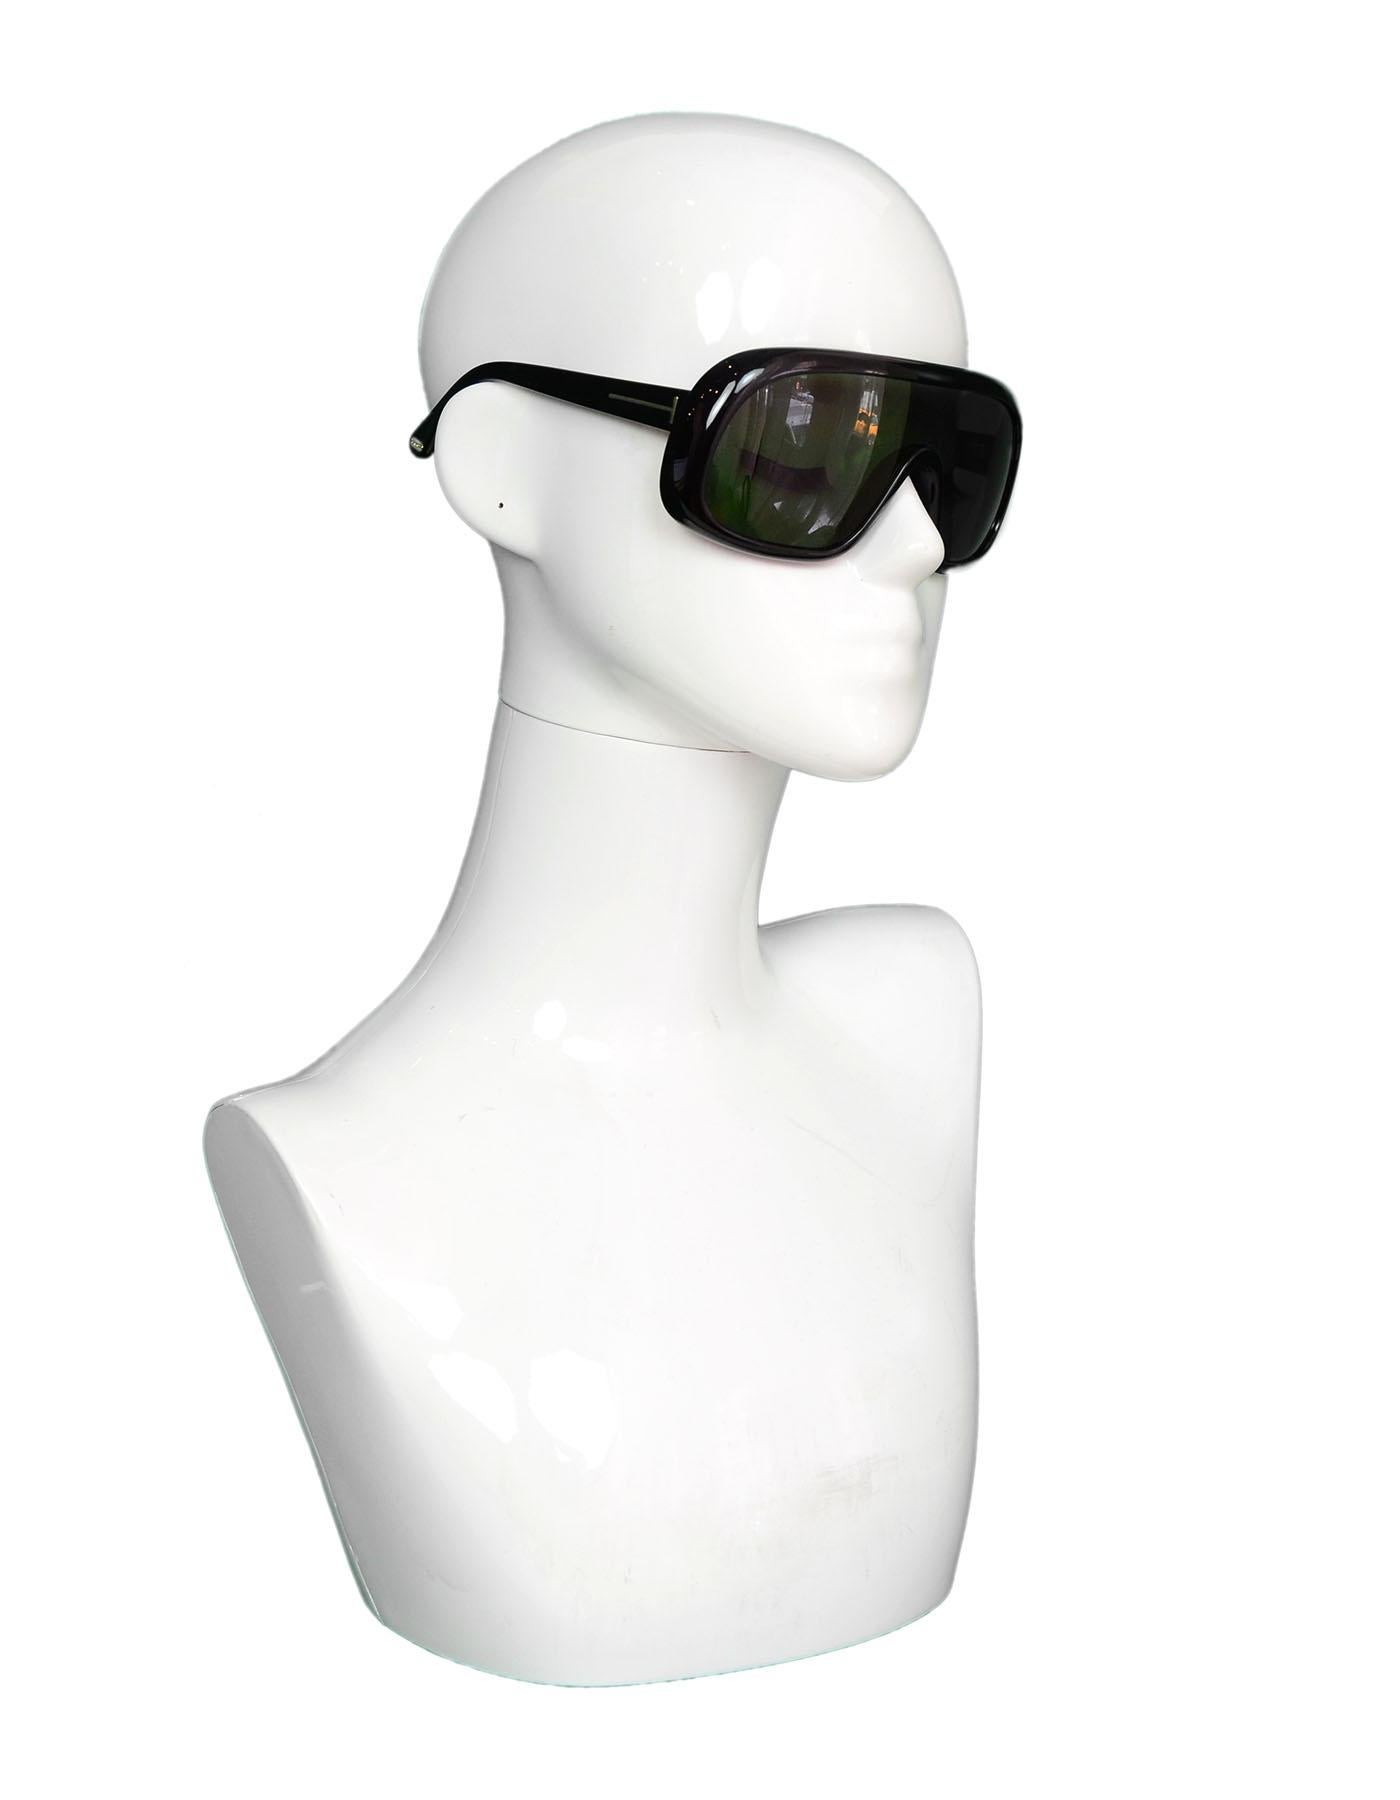 Tom Ford Black Sven Shield Green Tint Moto Unisex Sunglasses. Includes Case And Cleaning Cloth.

Made In: Italy 
Color: Black and green
Hardware: Goldtone
Overall Condition: 
Estimated Retail: $385 + tax
Includes:  Tom Ford case and cleaning cloth